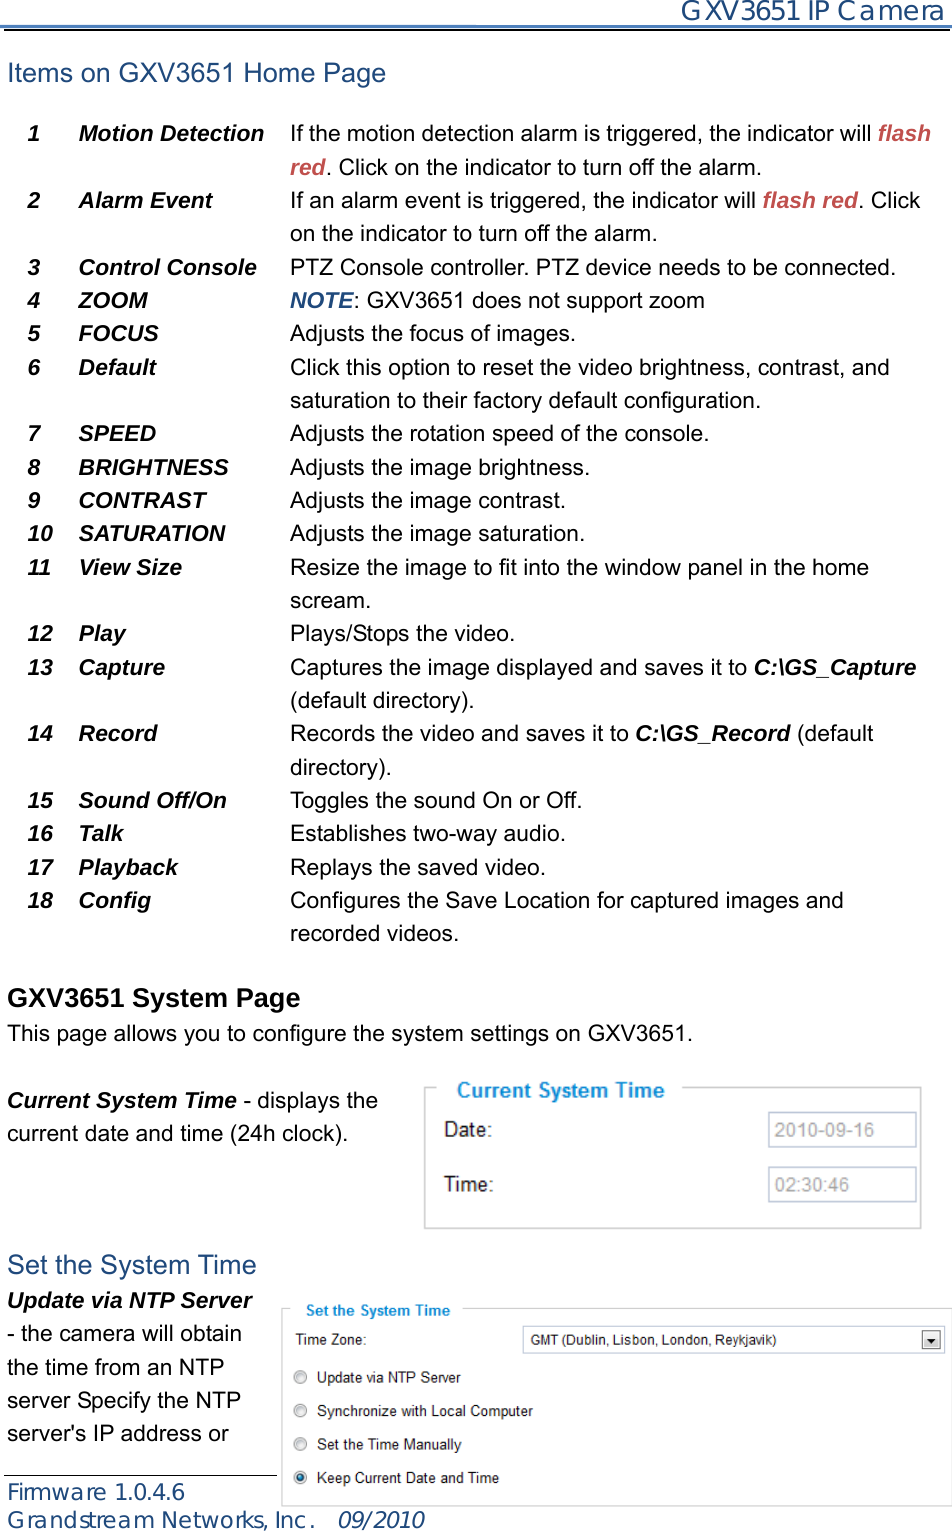     GXV3651 IP Camera Firmware 1.0.4.6                                                   Page 14 of 35    Grandstream Networks, Inc.  09/2010  Items on GXV3651 Home Page  1 Motion Detection If the motion detection alarm is triggered, the indicator will flash red. Click on the indicator to turn off the alarm. 2 Alarm Event  If an alarm event is triggered, the indicator will flash red. Click on the indicator to turn off the alarm. 3 Control Console  PTZ Console controller. PTZ device needs to be connected.   4 ZOOM  NOTE: GXV3651 does not support zoom 5 FOCUS  Adjusts the focus of images. 6 Default  Click this option to reset the video brightness, contrast, and saturation to their factory default configuration. 7 SPEED  Adjusts the rotation speed of the console. 8 BRIGHTNESS  Adjusts the image brightness. 9 CONTRAST  Adjusts the image contrast. 10 SATURATION  Adjusts the image saturation. 11  12 View Size  Play Resize the image to fit into the window panel in the home scream.  Plays/Stops the video. 13 Capture  Captures the image displayed and saves it to C:\GS_Capture (default directory). 14 Record  Records the video and saves it to C:\GS_Record (default directory). 15 Sound Off/On  Toggles the sound On or Off. 16 Talk  Establishes two-way audio. 17 Playback  Replays the saved video. 18 Config  Configures the Save Location for captured images and recorded videos.  GXV3651 System Page This page allows you to configure the system settings on GXV3651.    Current System Time - displays the current date and time (24h clock).      Set the System Time Update via NTP Server - the camera will obtain the time from an NTP server Specify the NTP server&apos;s IP address or 